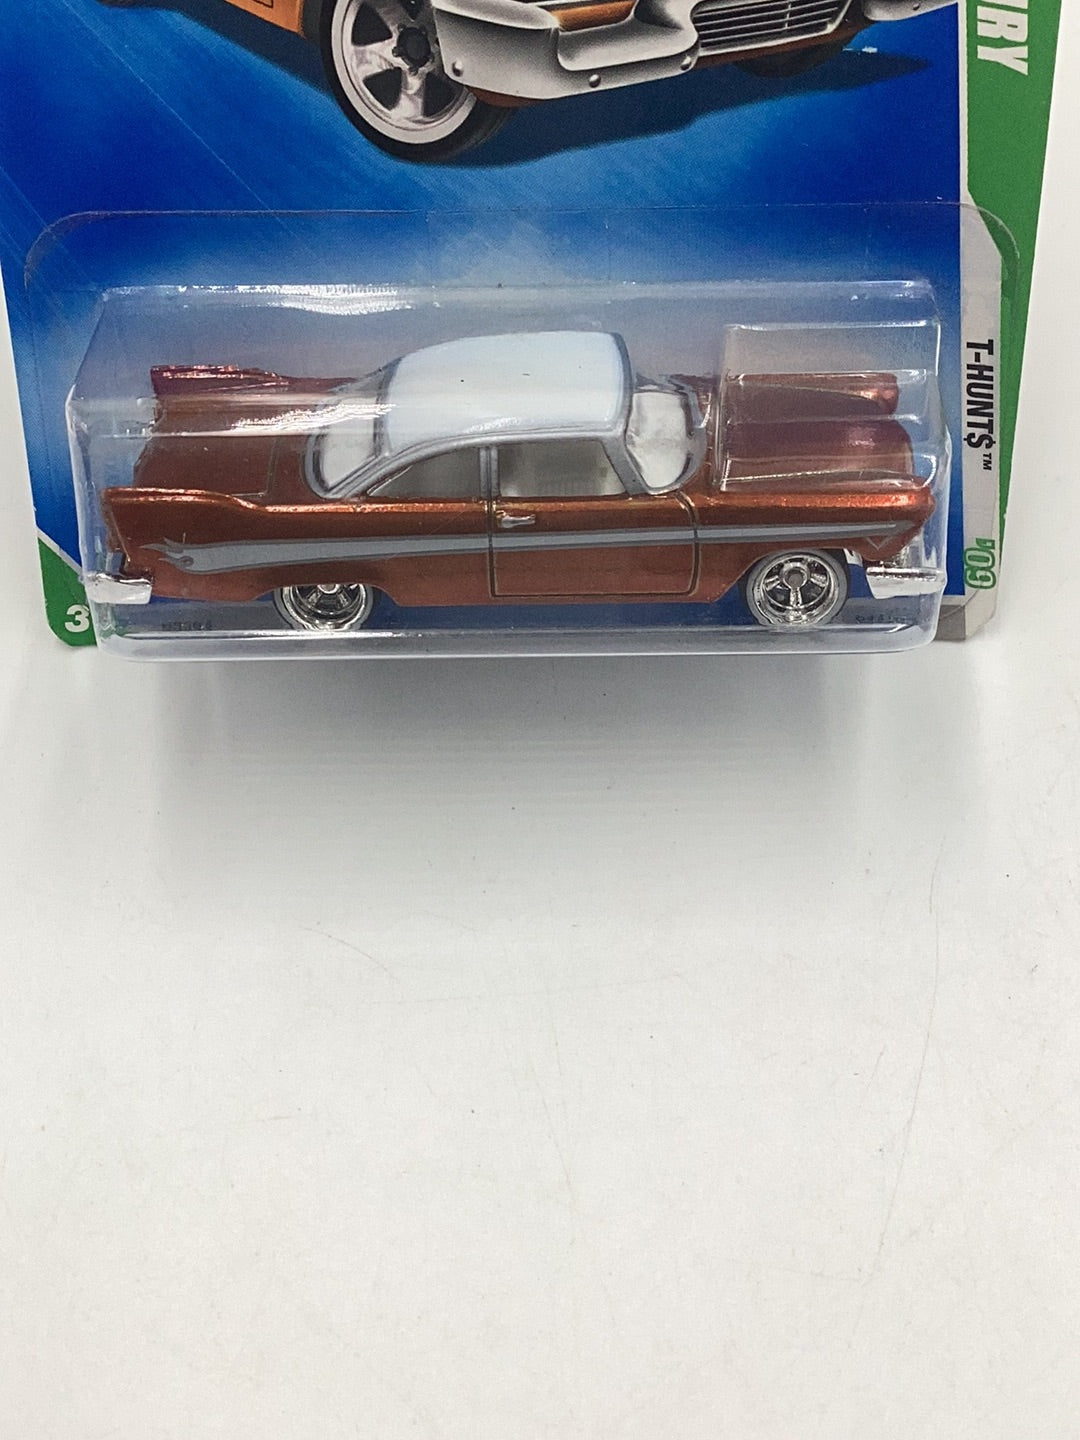 2009 hot wheels treasure hunt #44 57 Plymouth Fury with protector